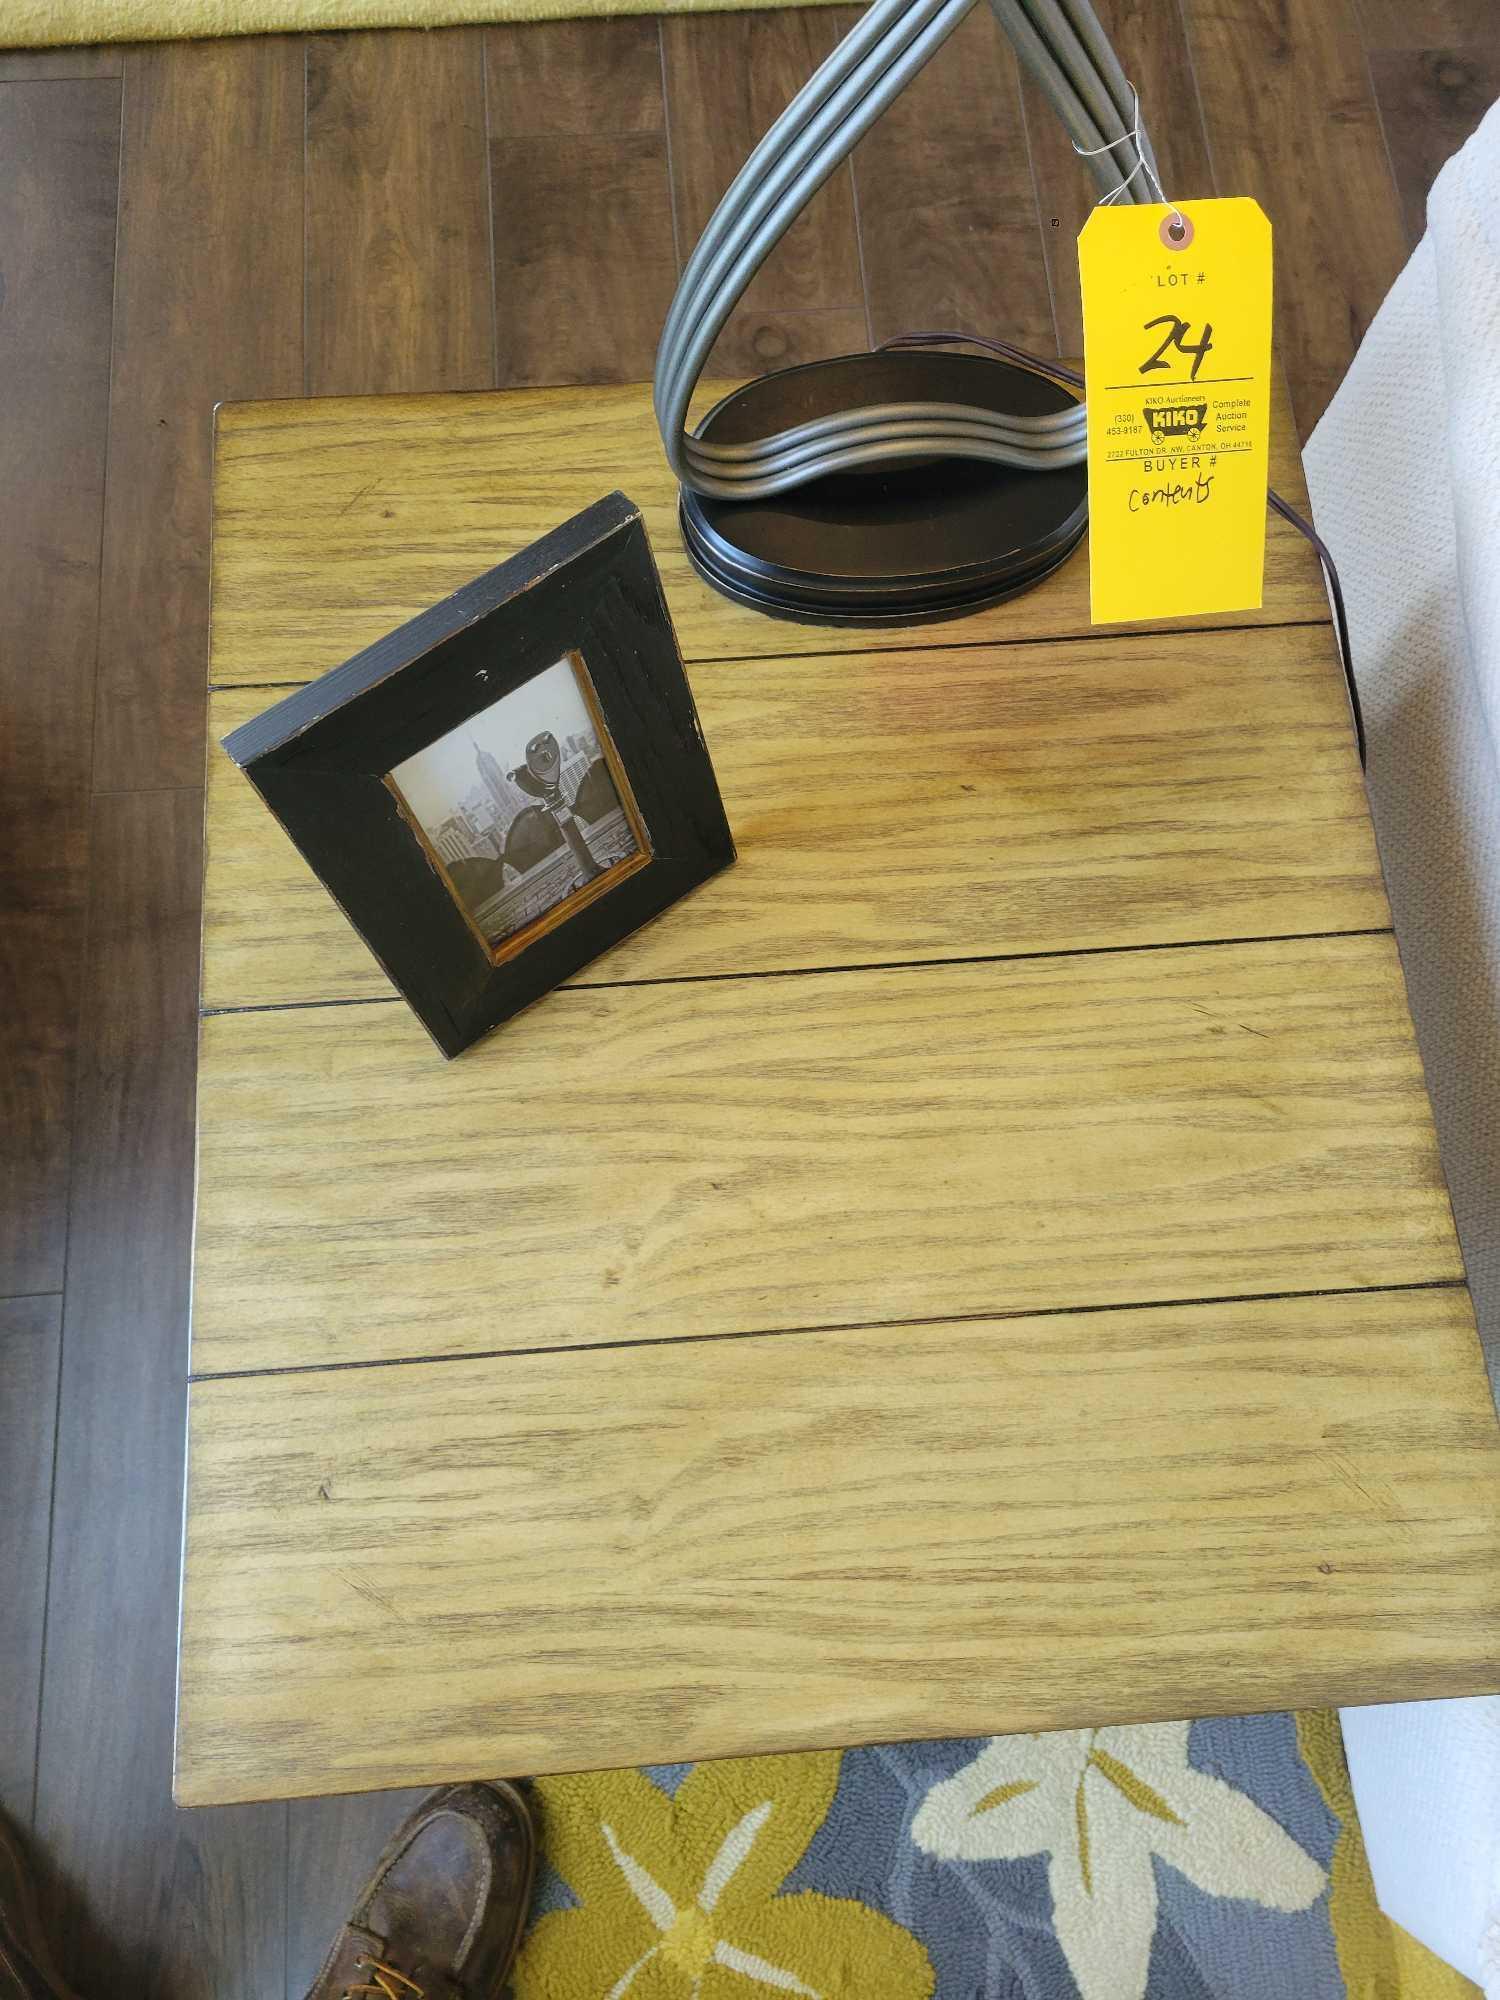 Stein World Beaumont end table and matching coffee table